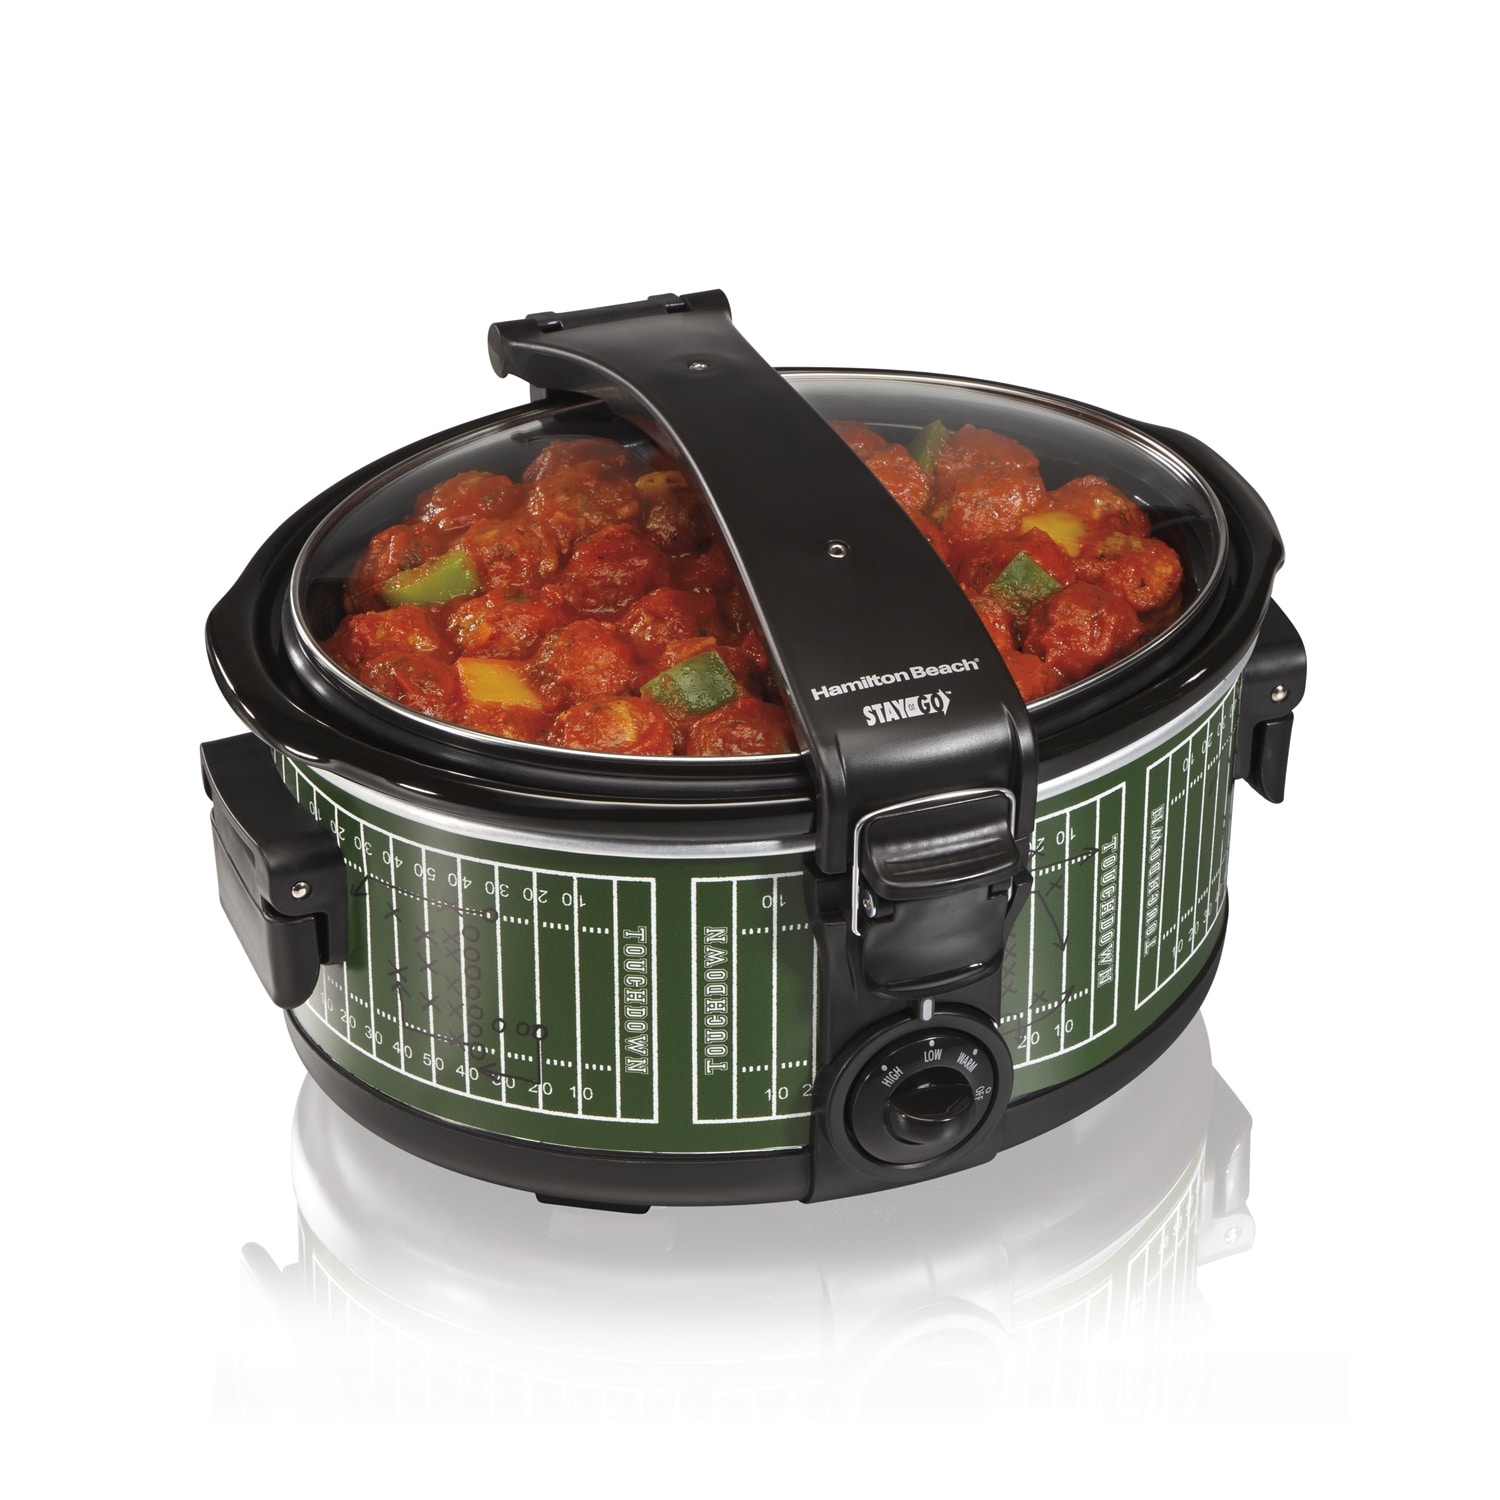 Crockpot™ 6-Quart Slow Cooker with MyTime™ Technology